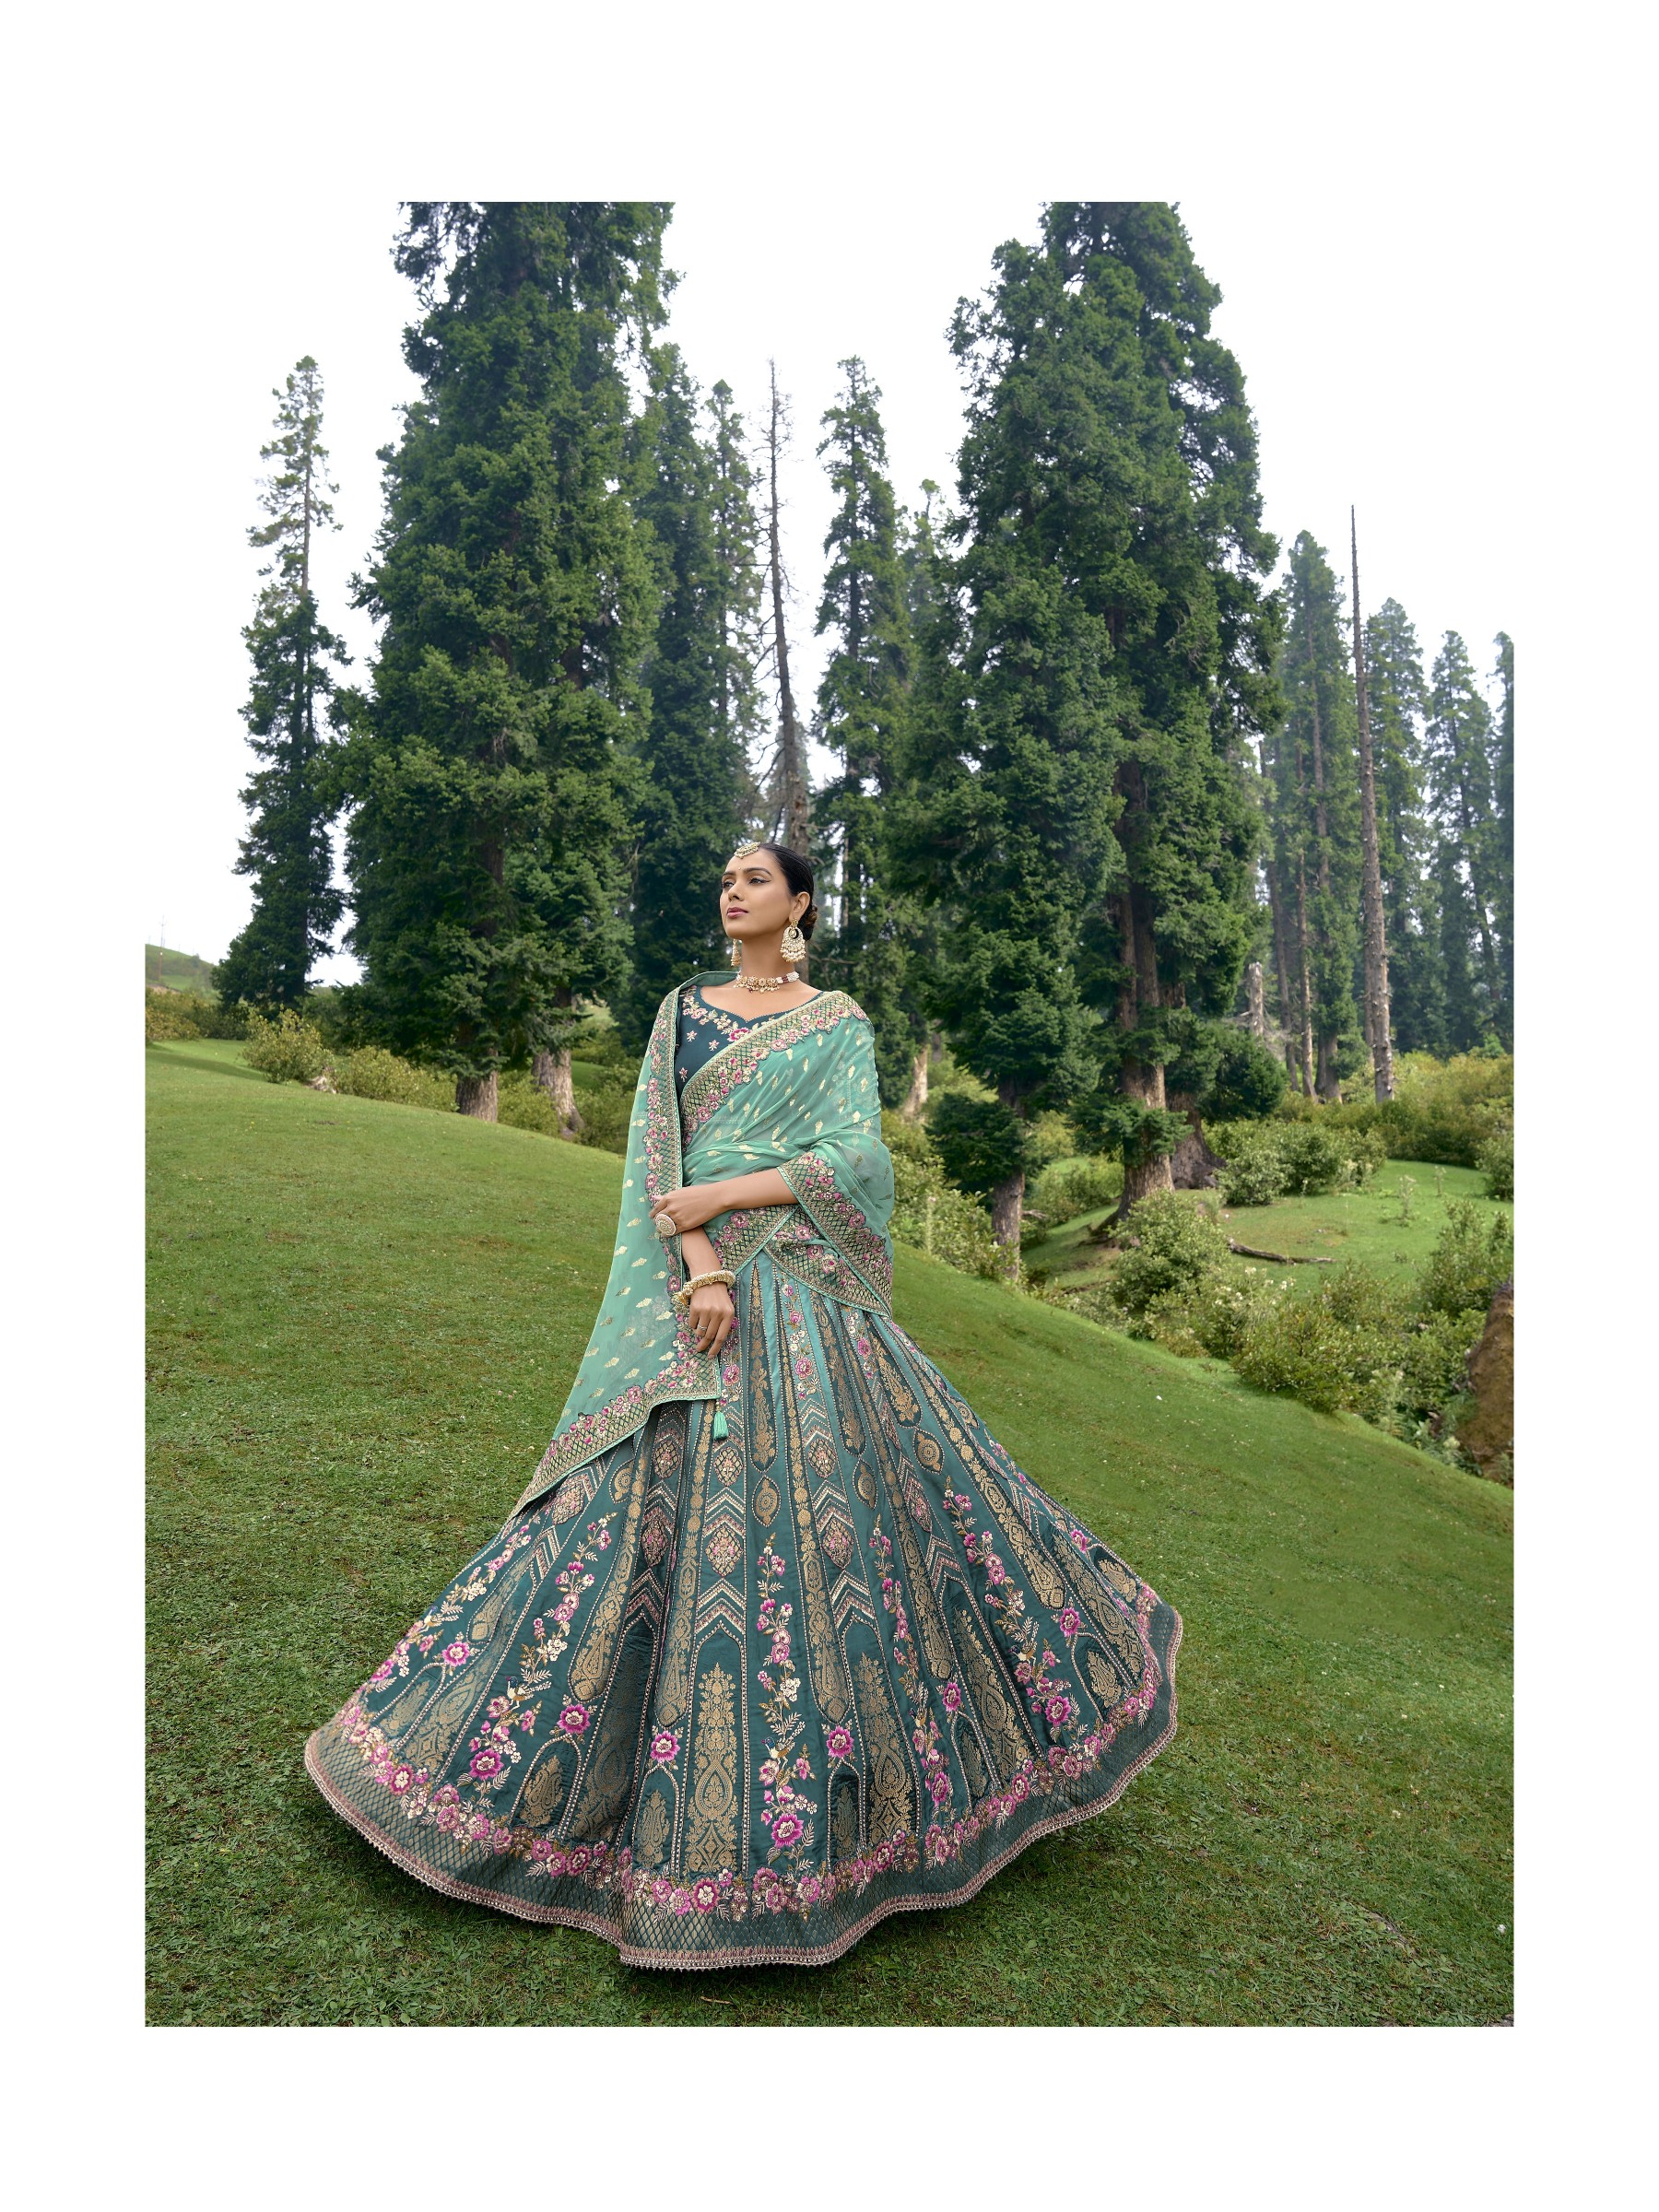 Pure Dola Silk Wedding Lehenga in Teal Blue Color With Embroidery work